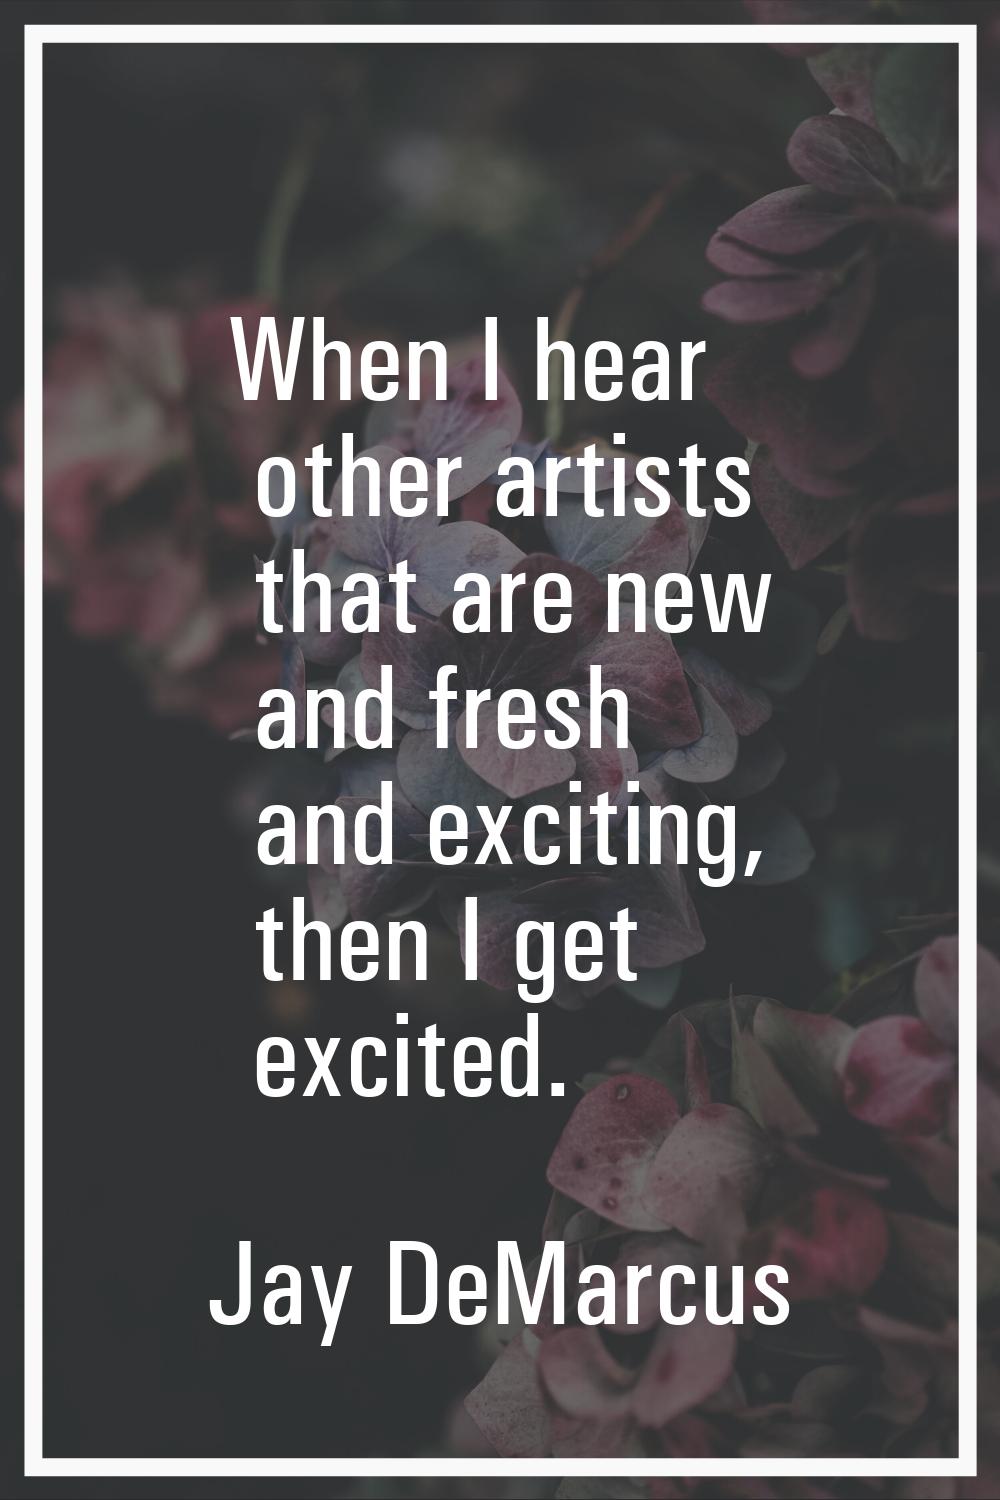 When I hear other artists that are new and fresh and exciting, then I get excited.